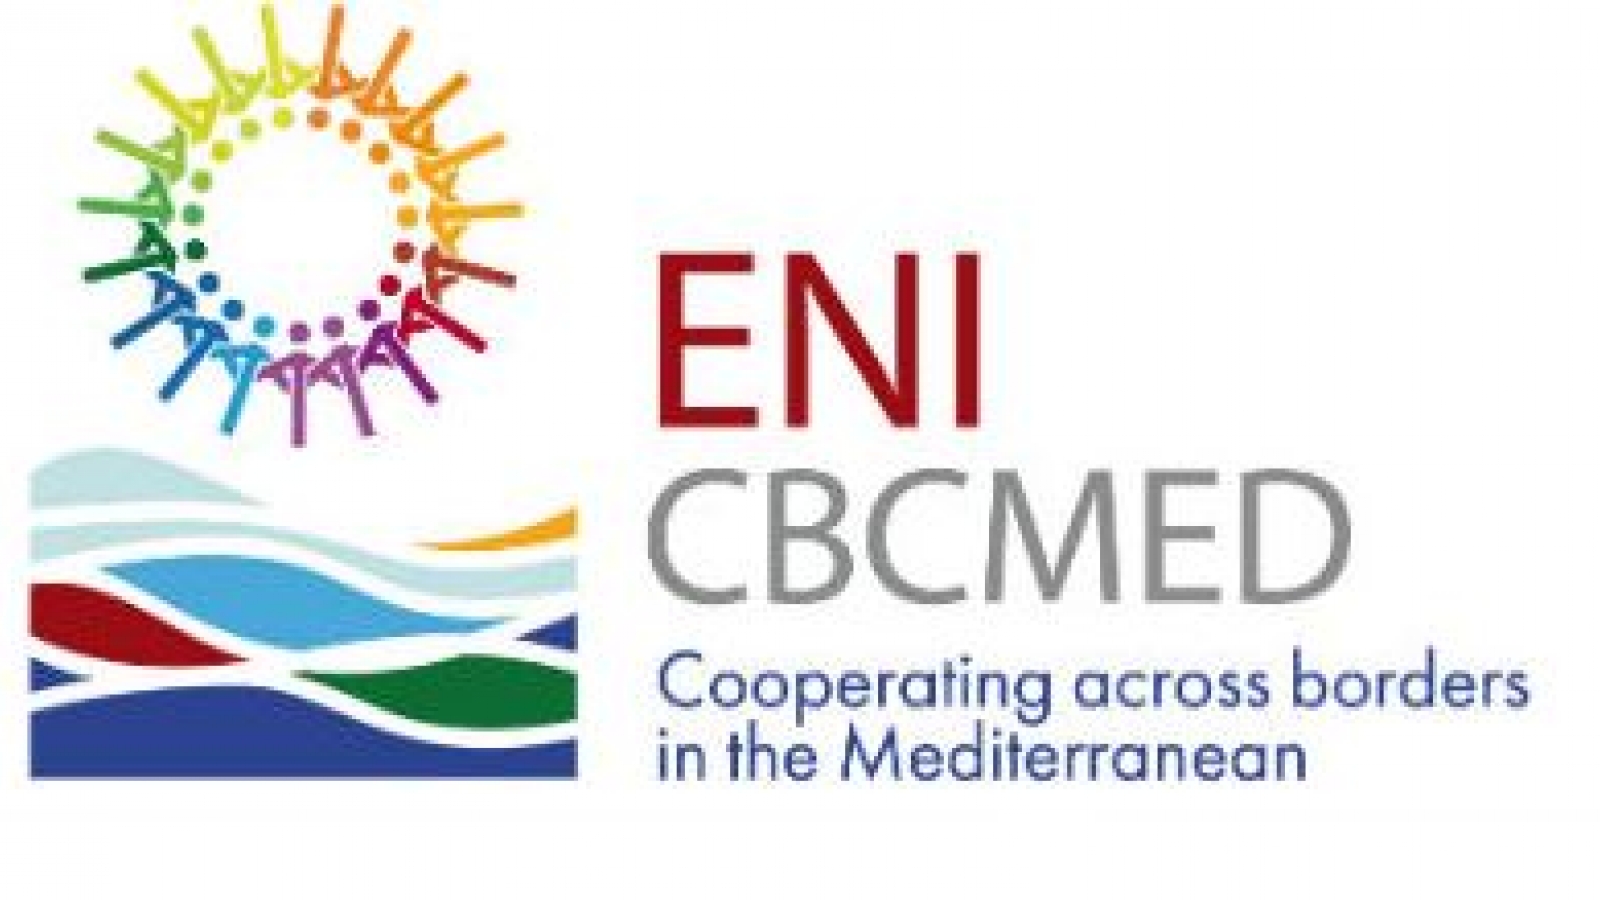 From the Arctic to the Southern Mediterranean: stories of cross-border cooperation at the European Week of Cities And Regions